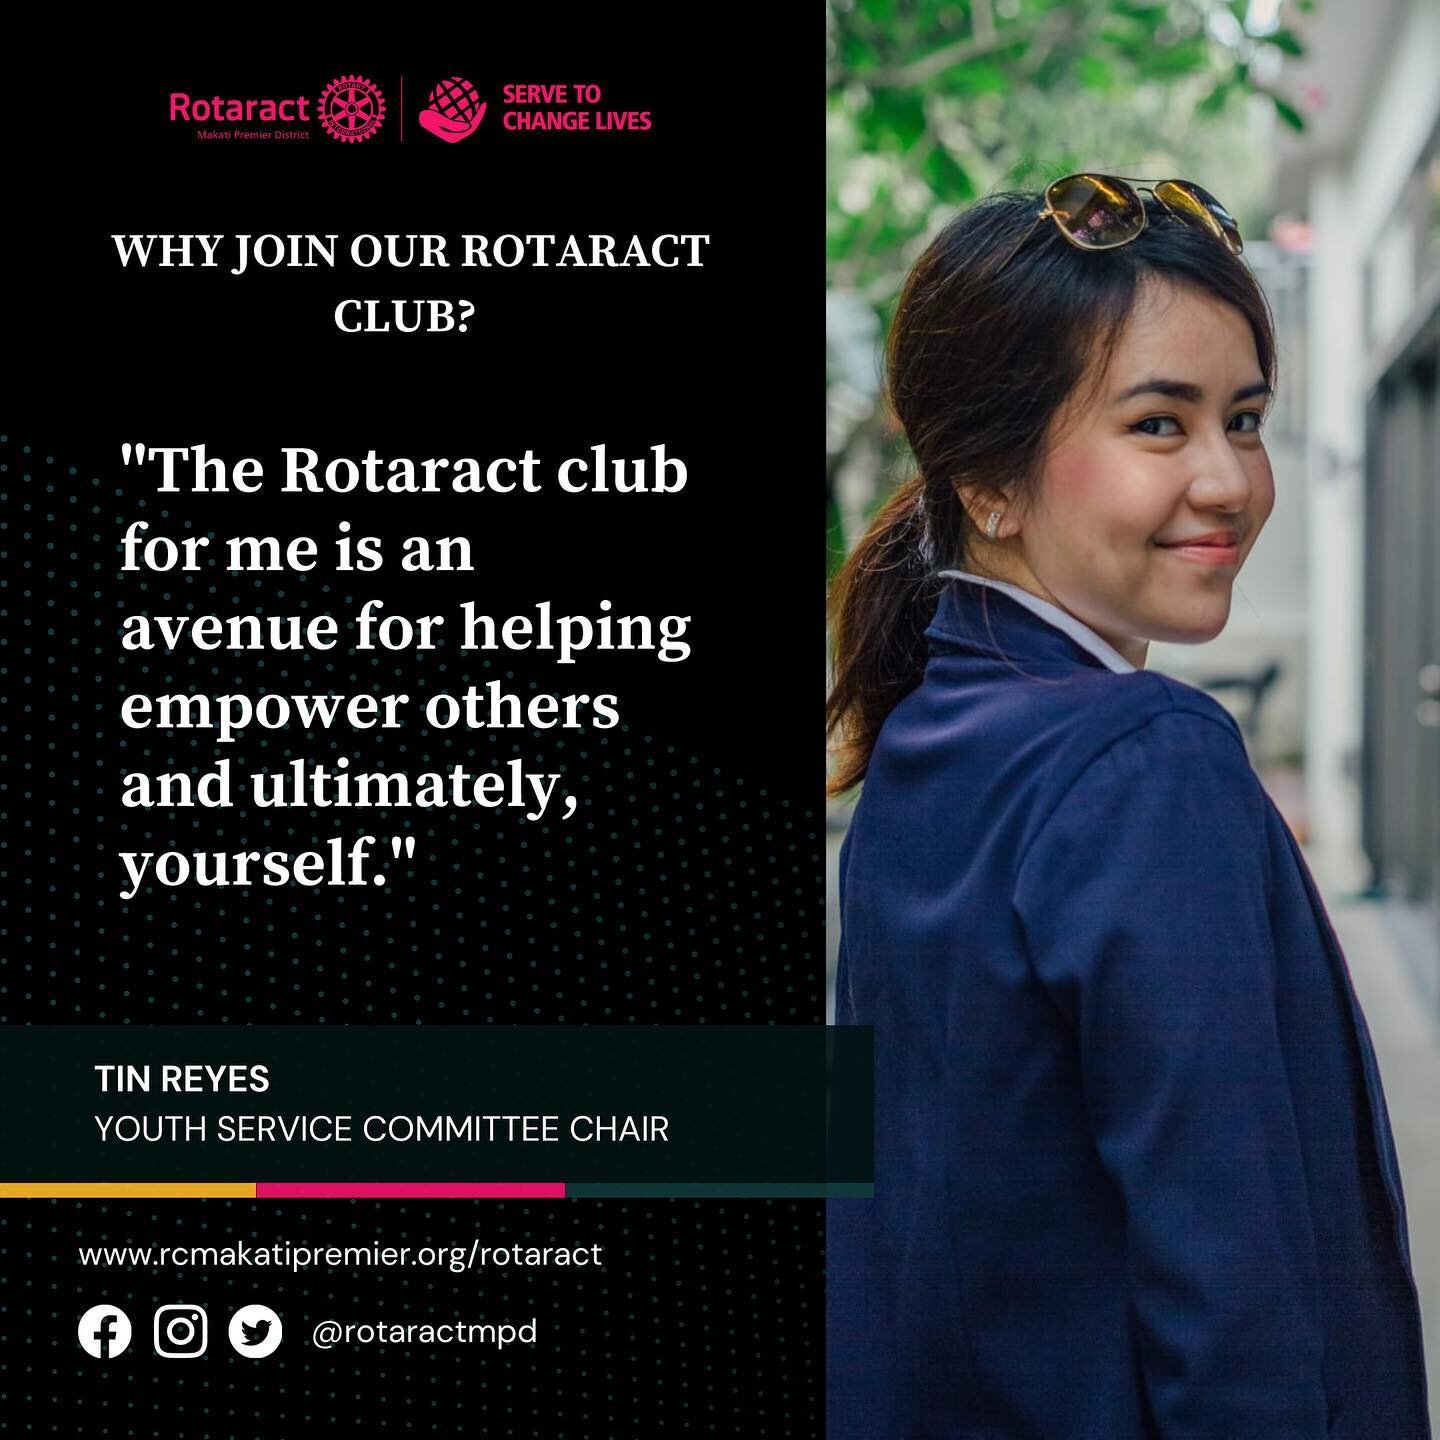 WE WANT YOU!

Join our dynamic group of young individuals serving to change lives!

www.rcmakatipremier.org/rotaract

#servetochangelives #rotaractclub #rotaractclubofmakatipremierdistrict
#rotaryinternational #rotaryclub #rotaractinternational #igda